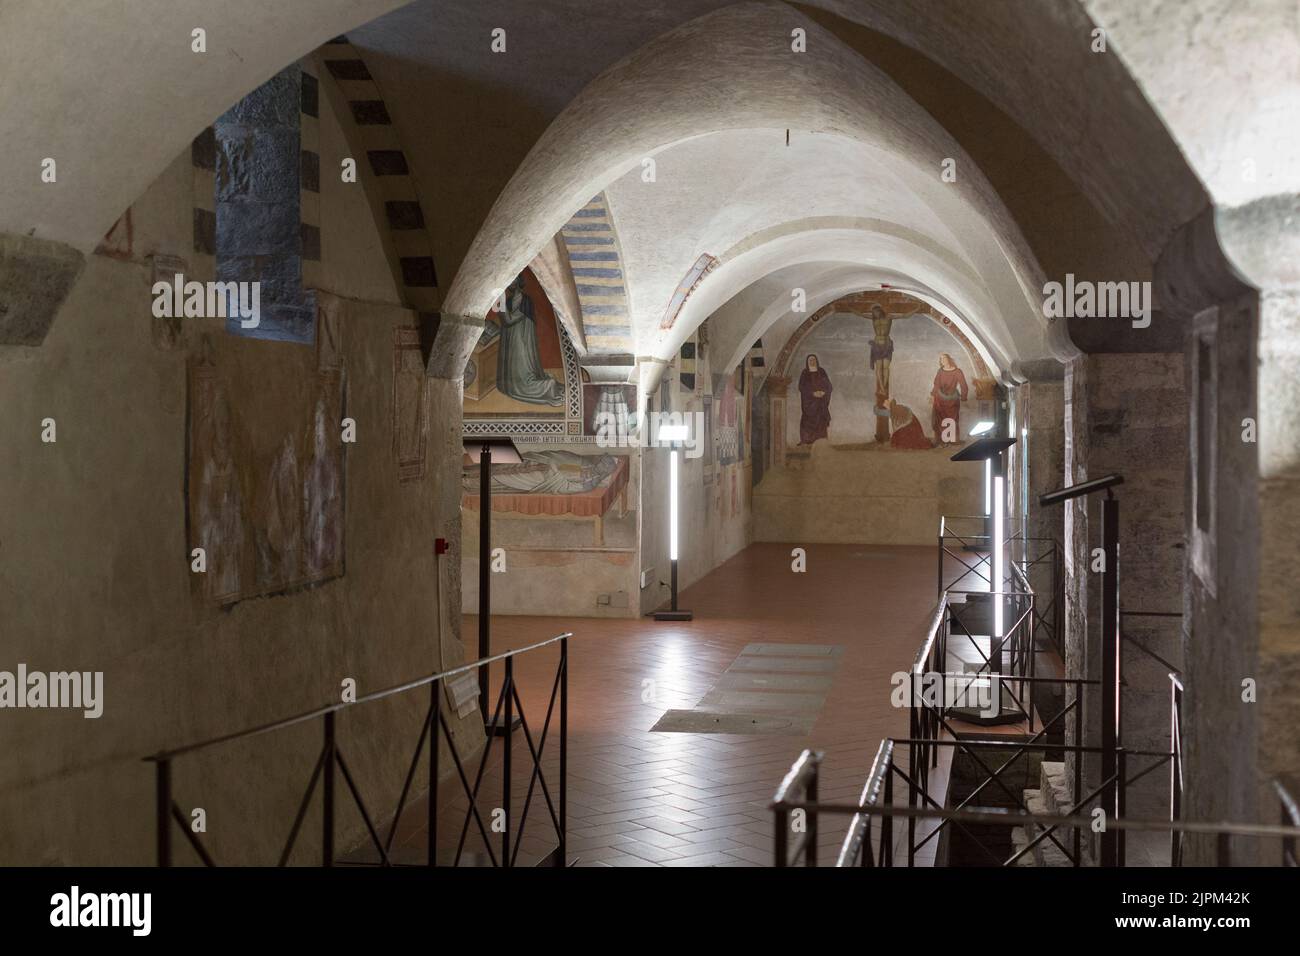 The vaults of the cathedral museum of Prato, Italy Stock Photo